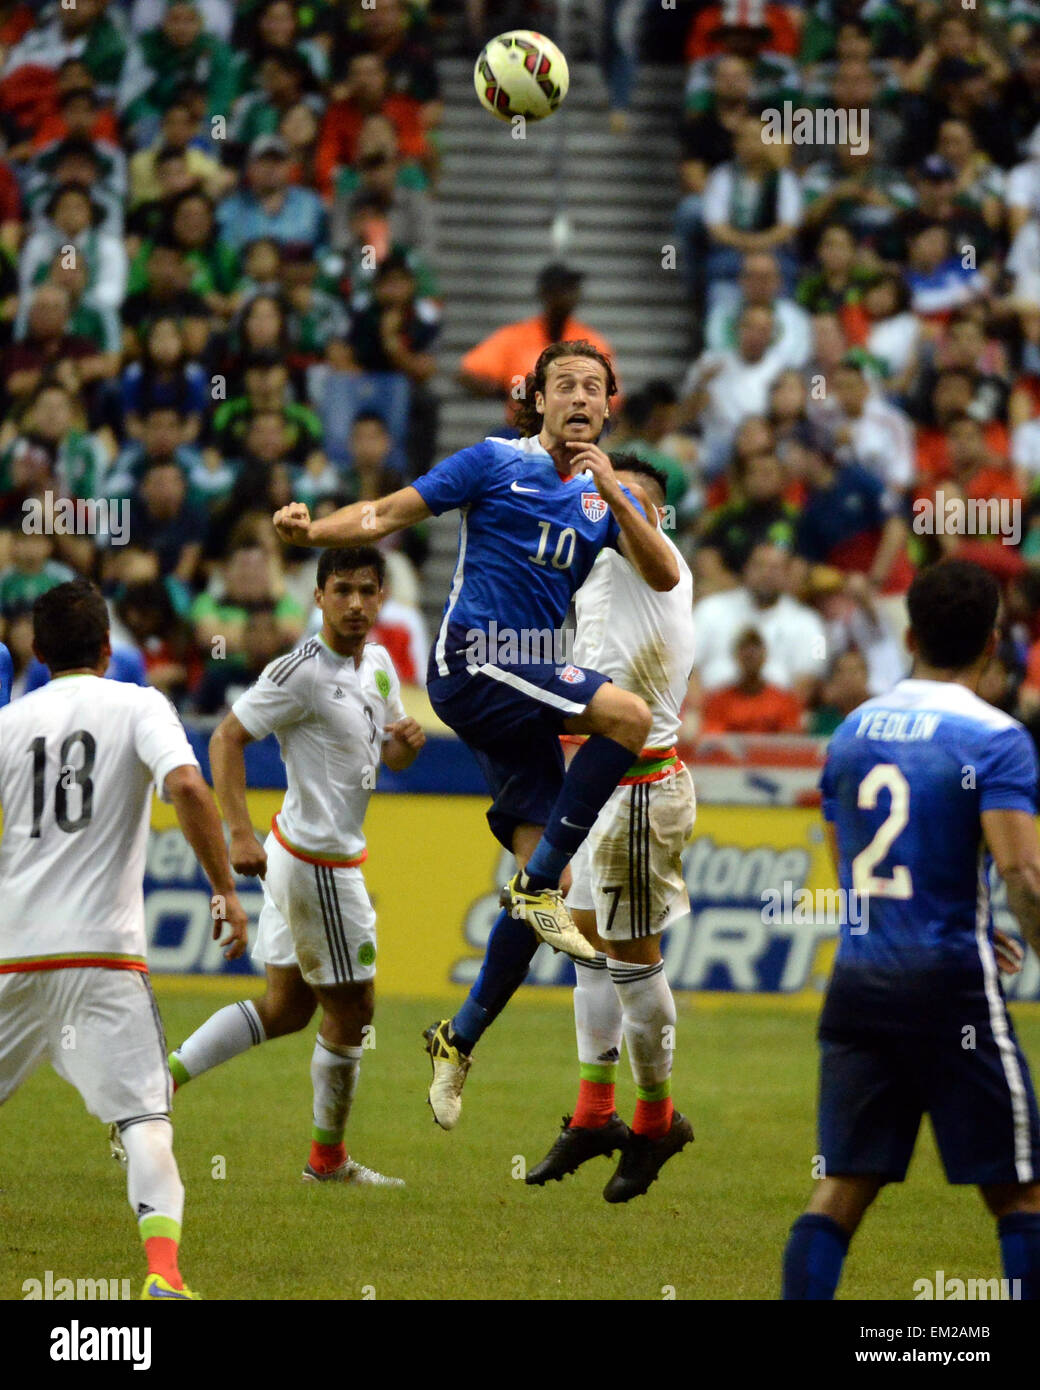 April 15, 2015. Mix Diskerud #10 of the USA Men's Soccer team in action vs Mexico at the Alamodome in an International Friendly in San Antonio Texas. The U.S. defeats Mexico 2 - 0. Stock Photo